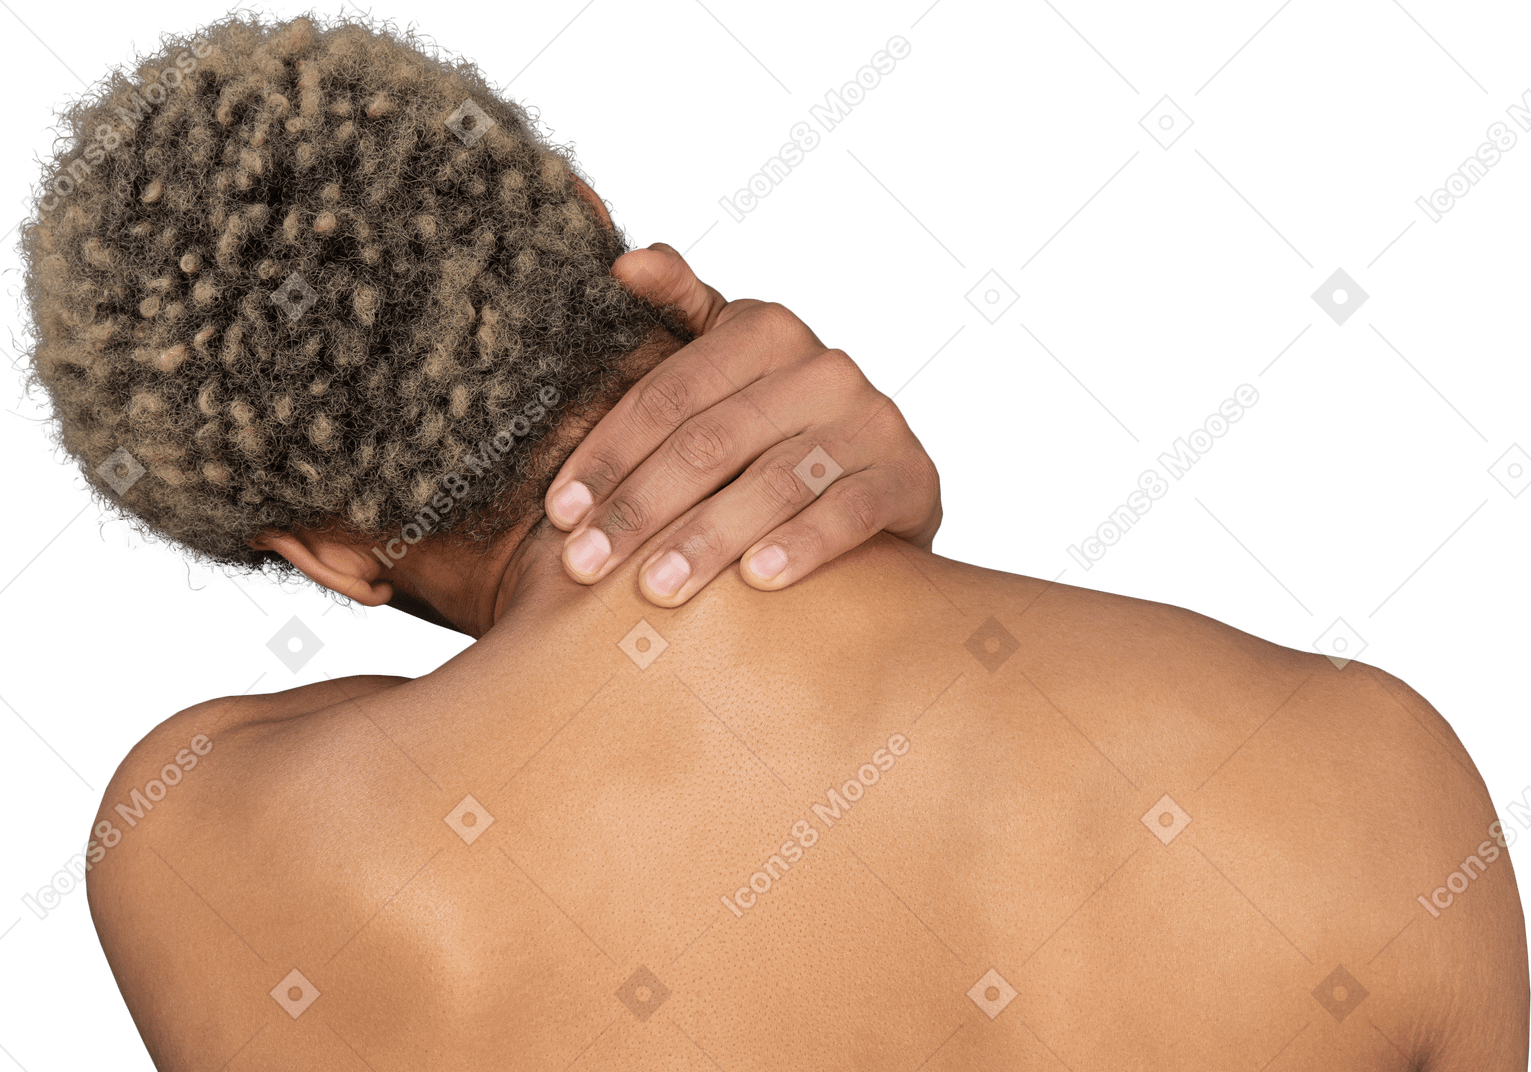 Back view of a shirtless afro man touching his neck